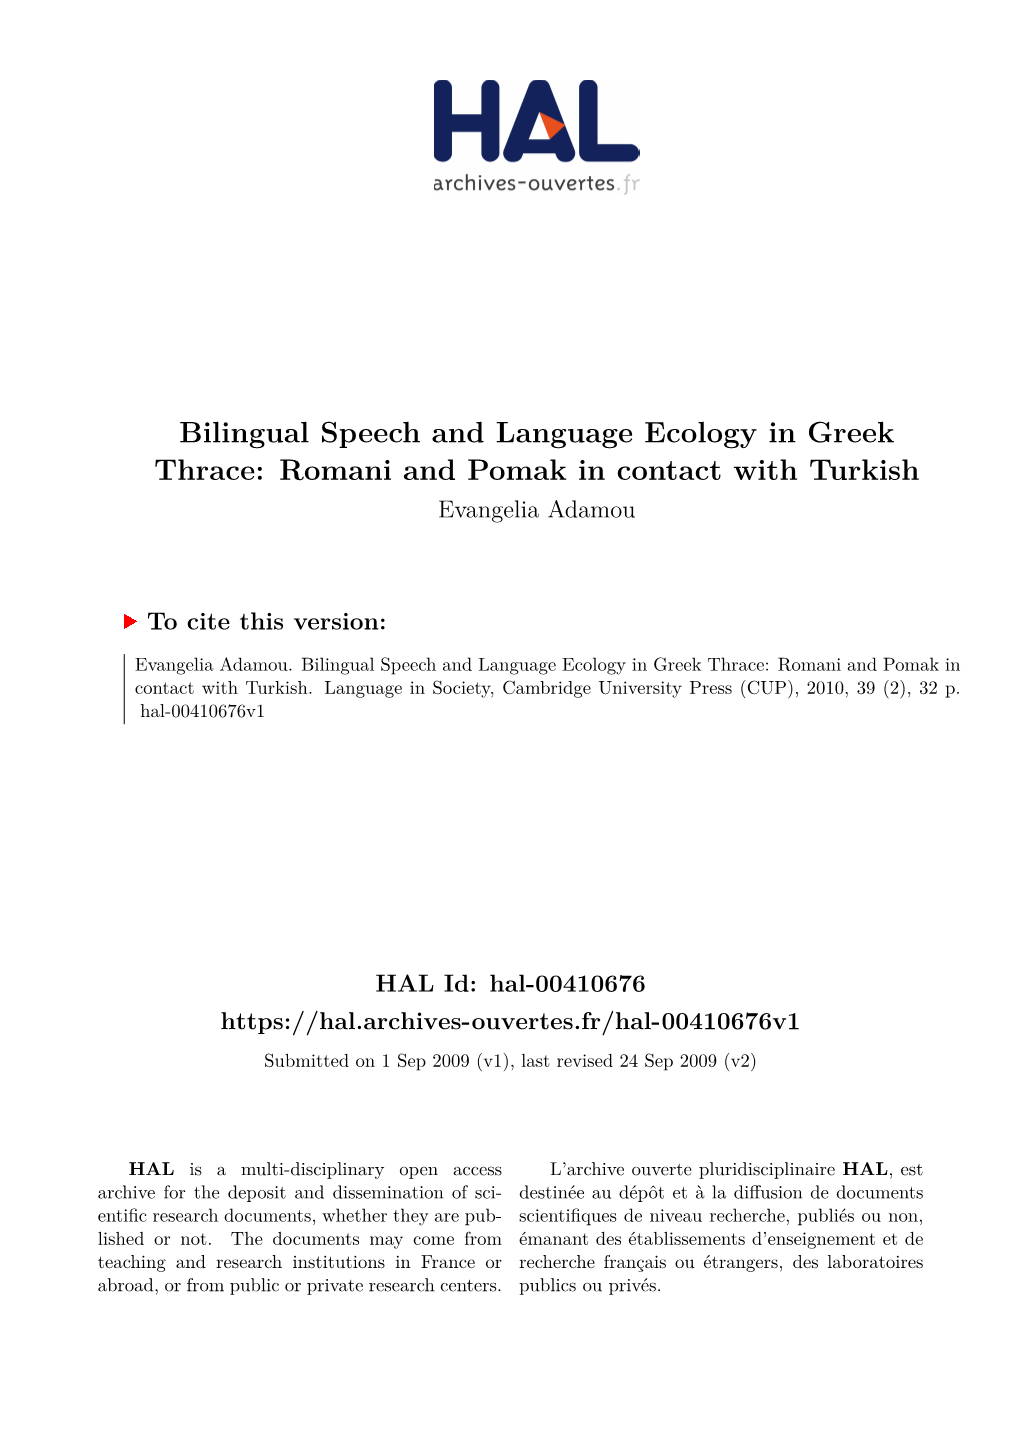 Bilingual Speech and Language Ecology in Greek Thrace: Romani and Pomak in Contact with Turkish Evangelia Adamou